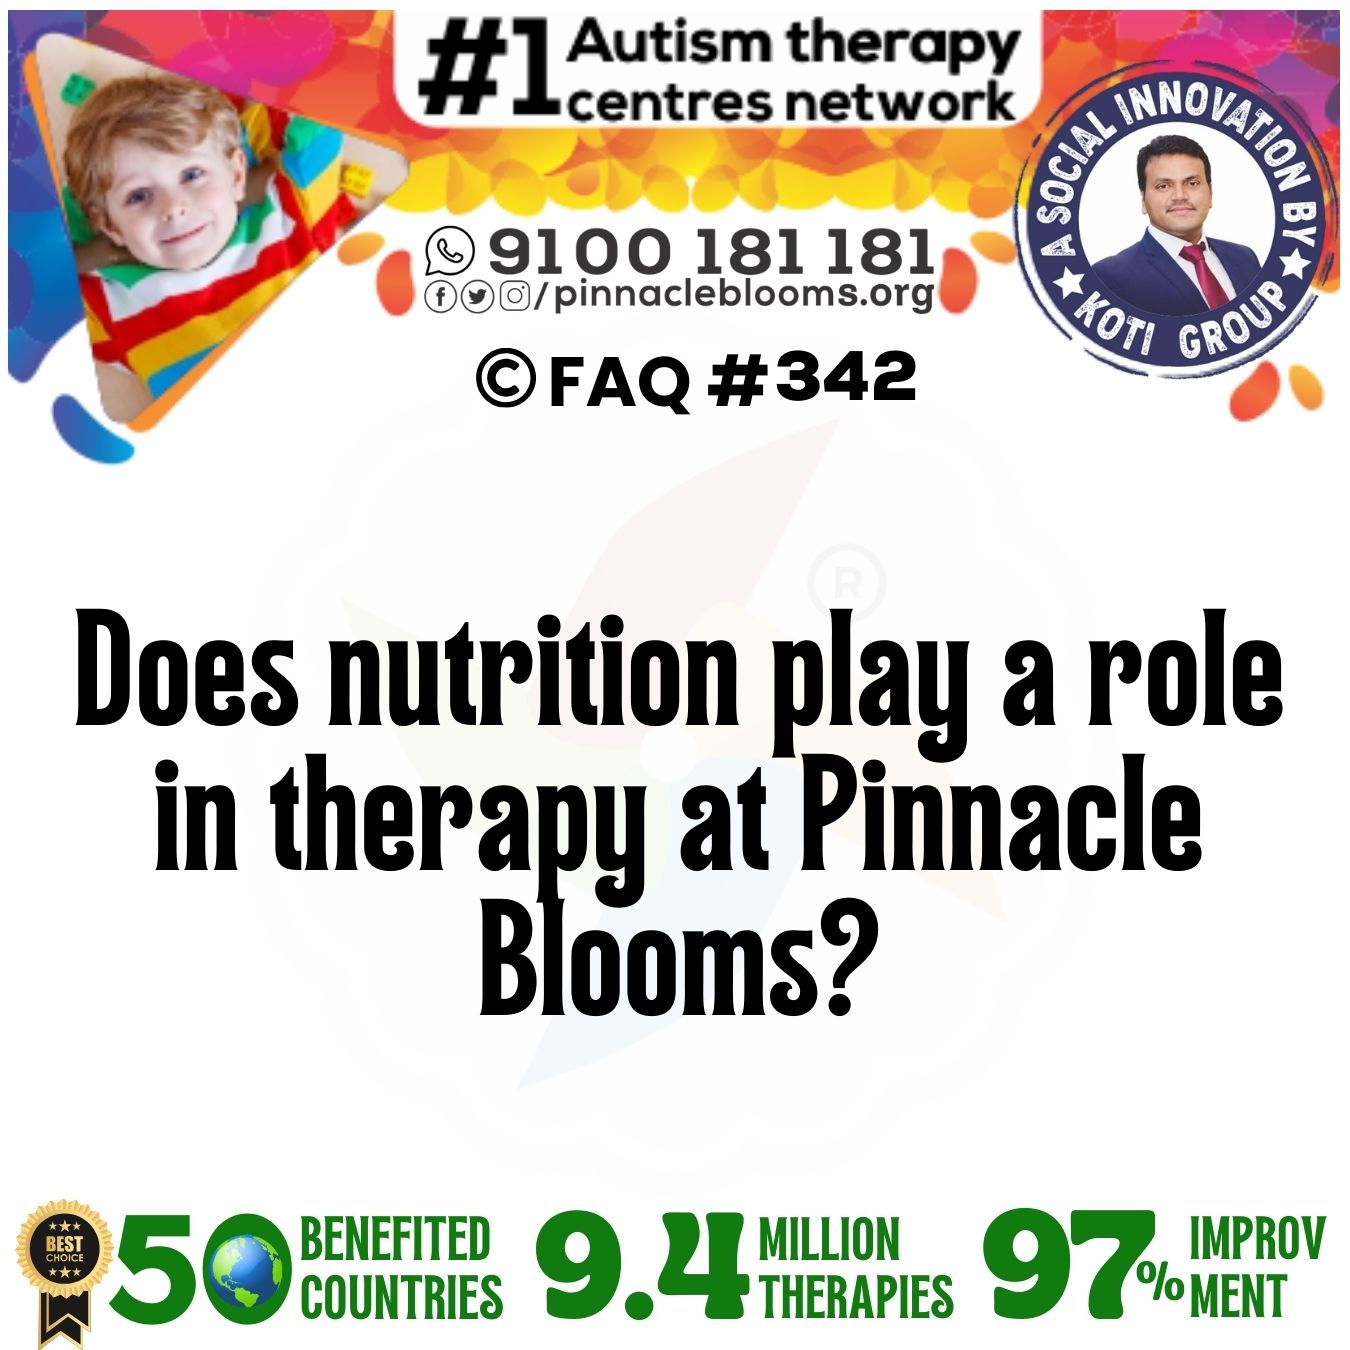 Does nutrition play a role in therapy at Pinnacle Blooms?